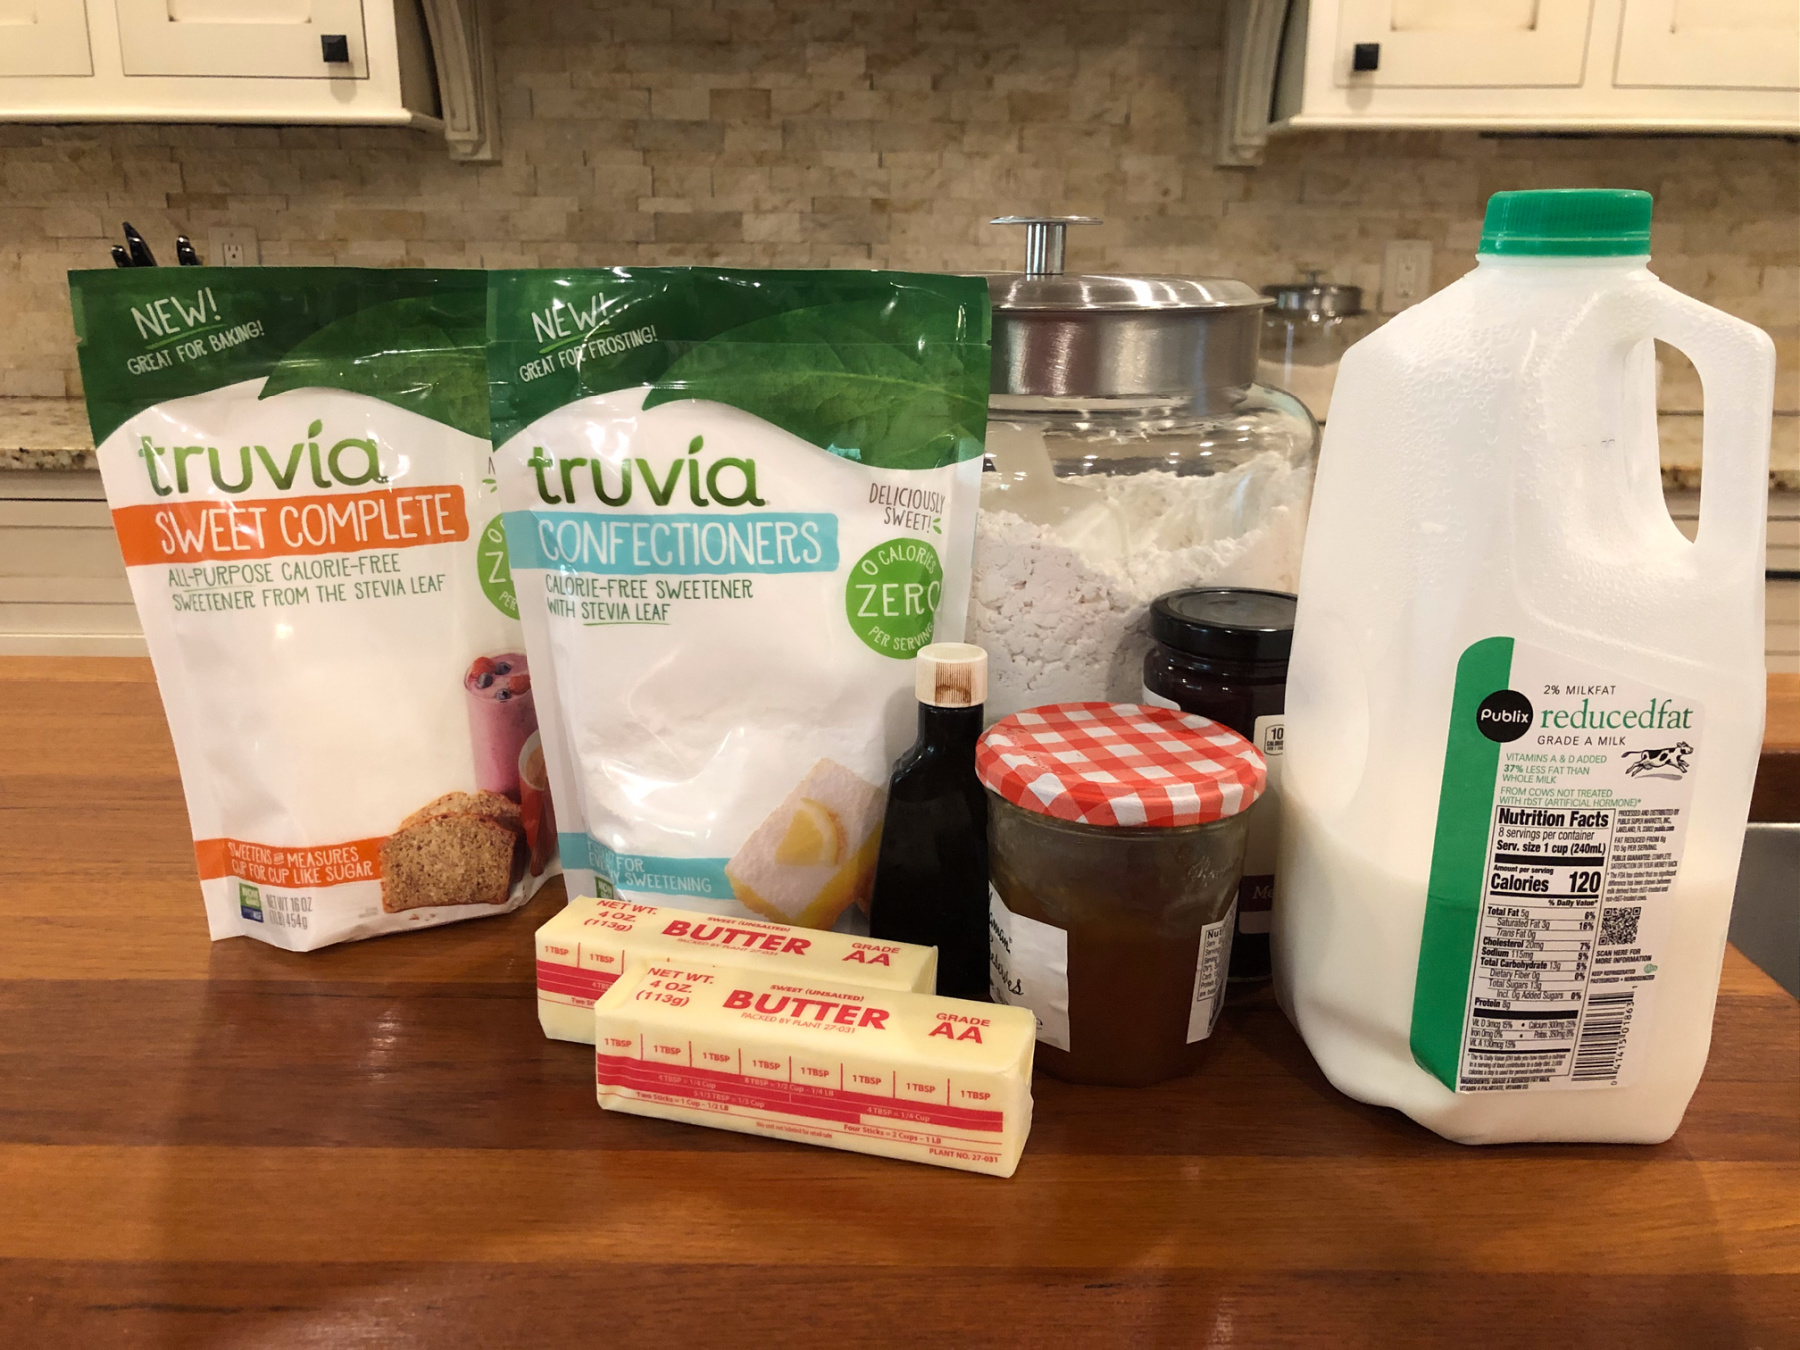 Try My Sugar-Free Thumbprint Cookies Made With New Truvia® Sweeteners - Save $2 With The New Coupon! on I Heart Publix